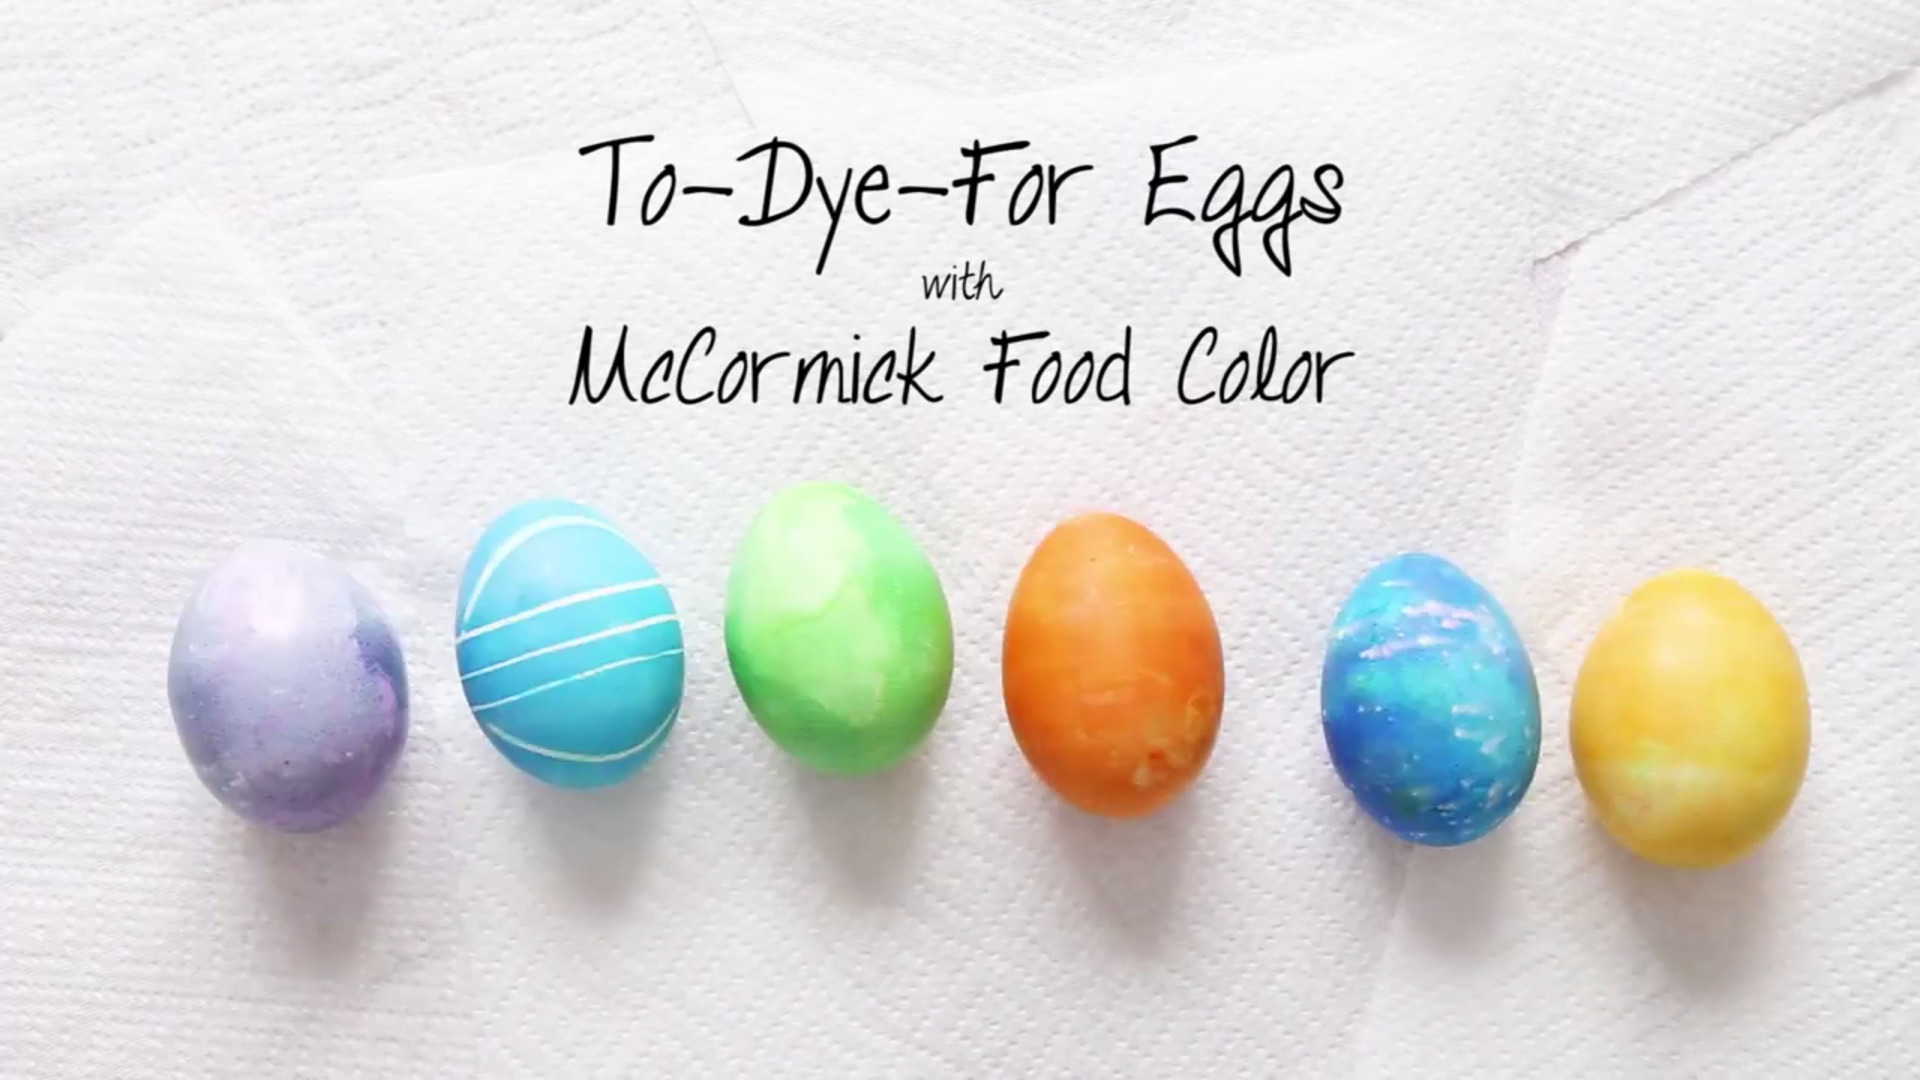 Ultimate Guide to Coloring and Dying Easter Eggs - Sugar and Charm